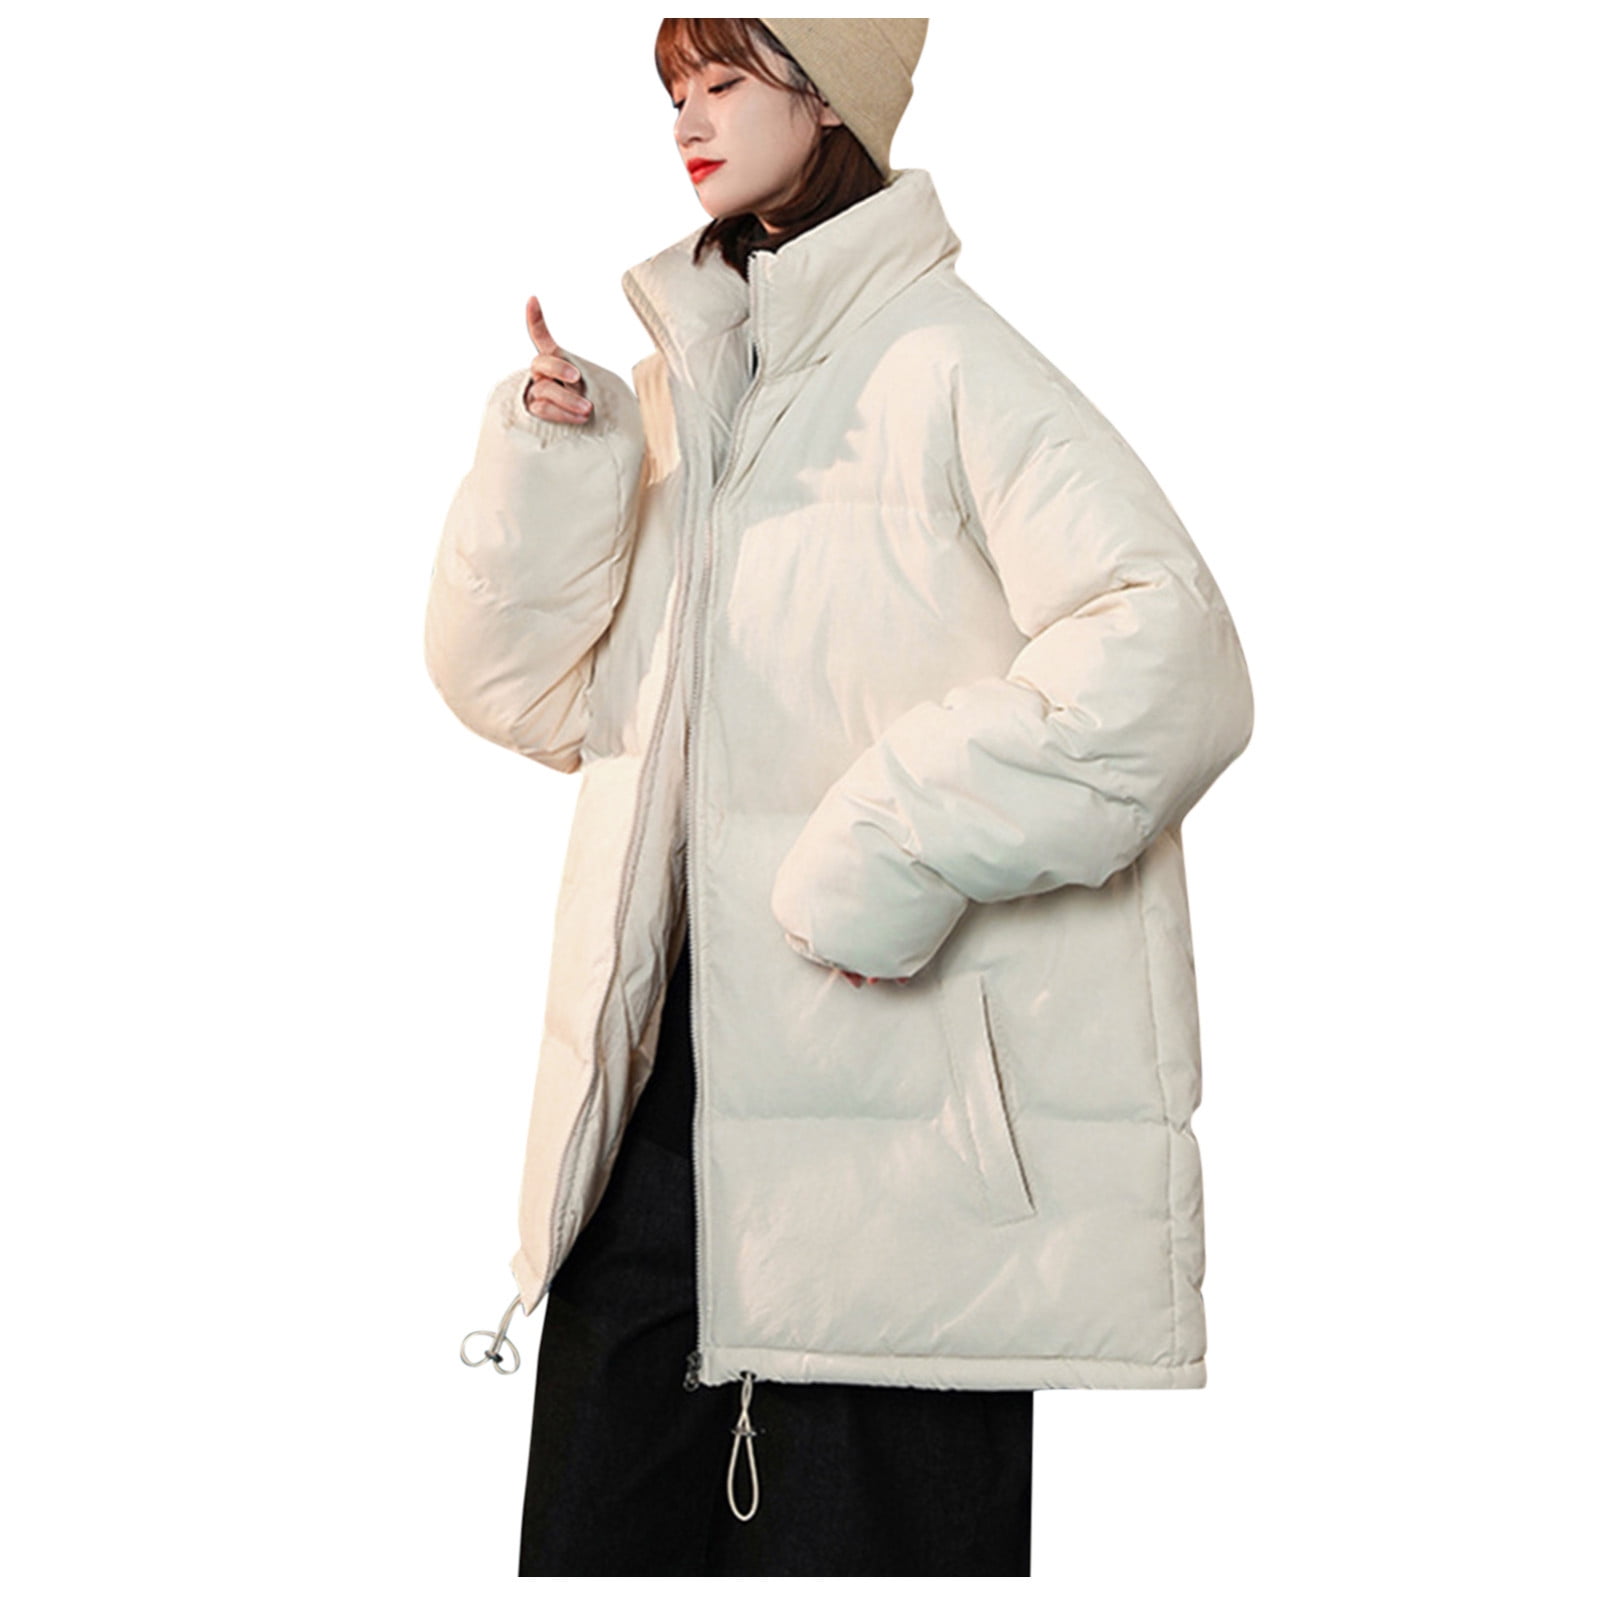 HSMQHJWE Womens Business Attire Womens Puffy Coat Womens Casual Light  Weight Thin Long Jacket Coat Long Sleeve Button Down Chest Pocketed Coats